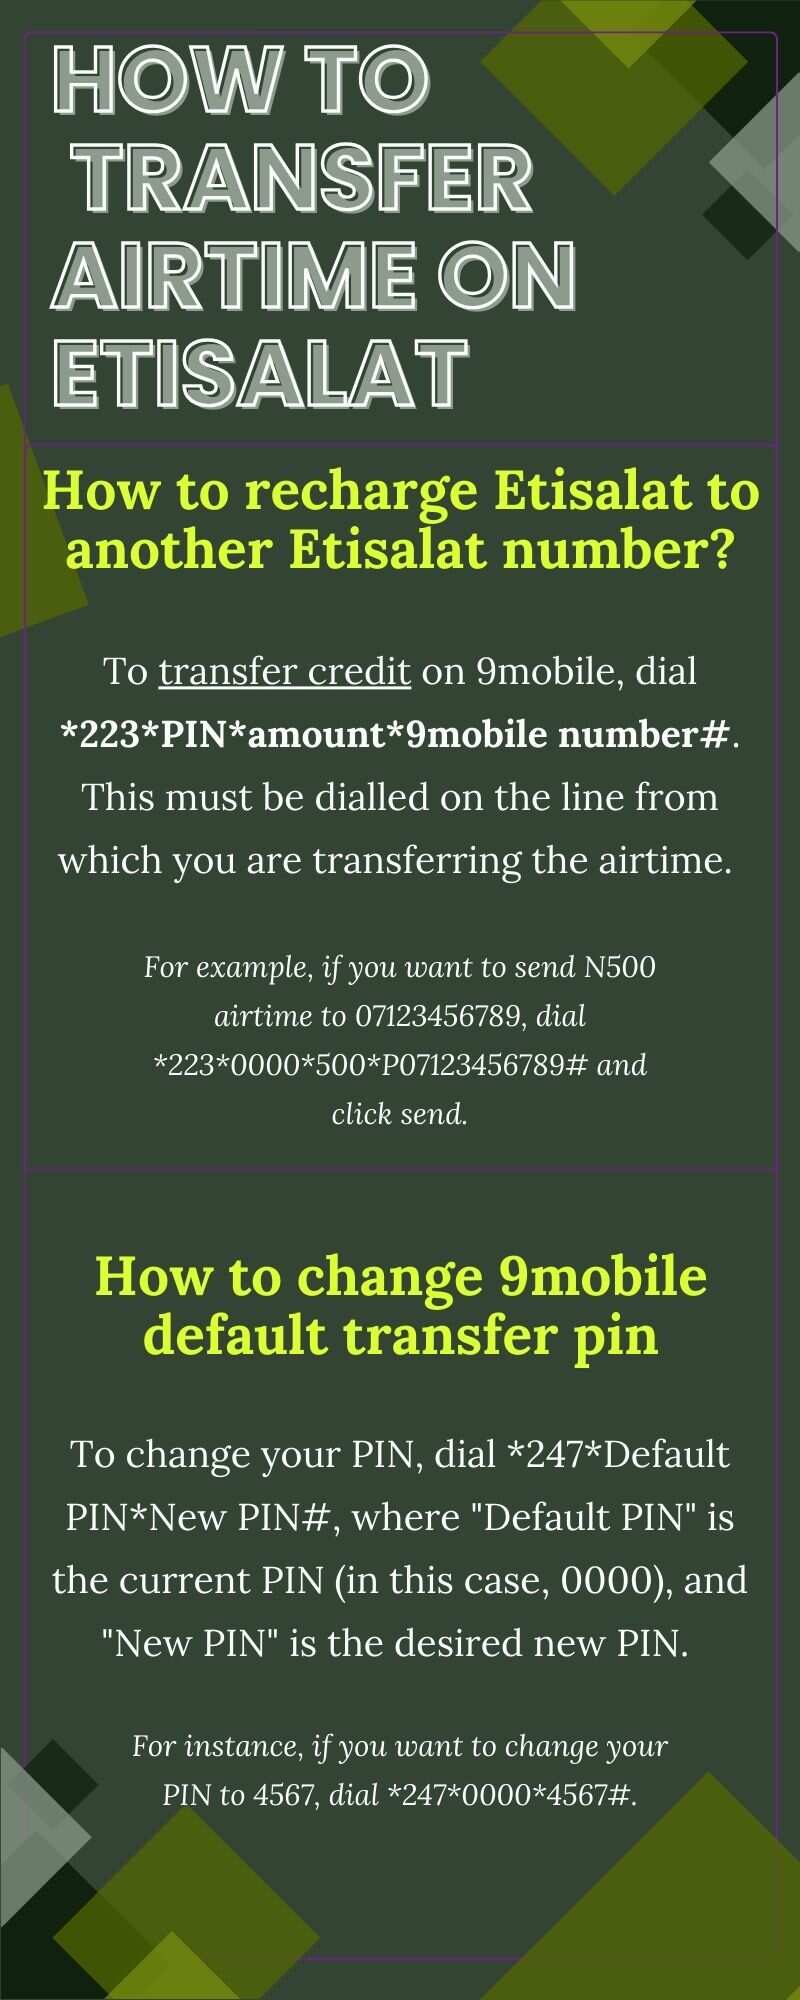 How to transfer airtime on Etisalat (9Mobile)